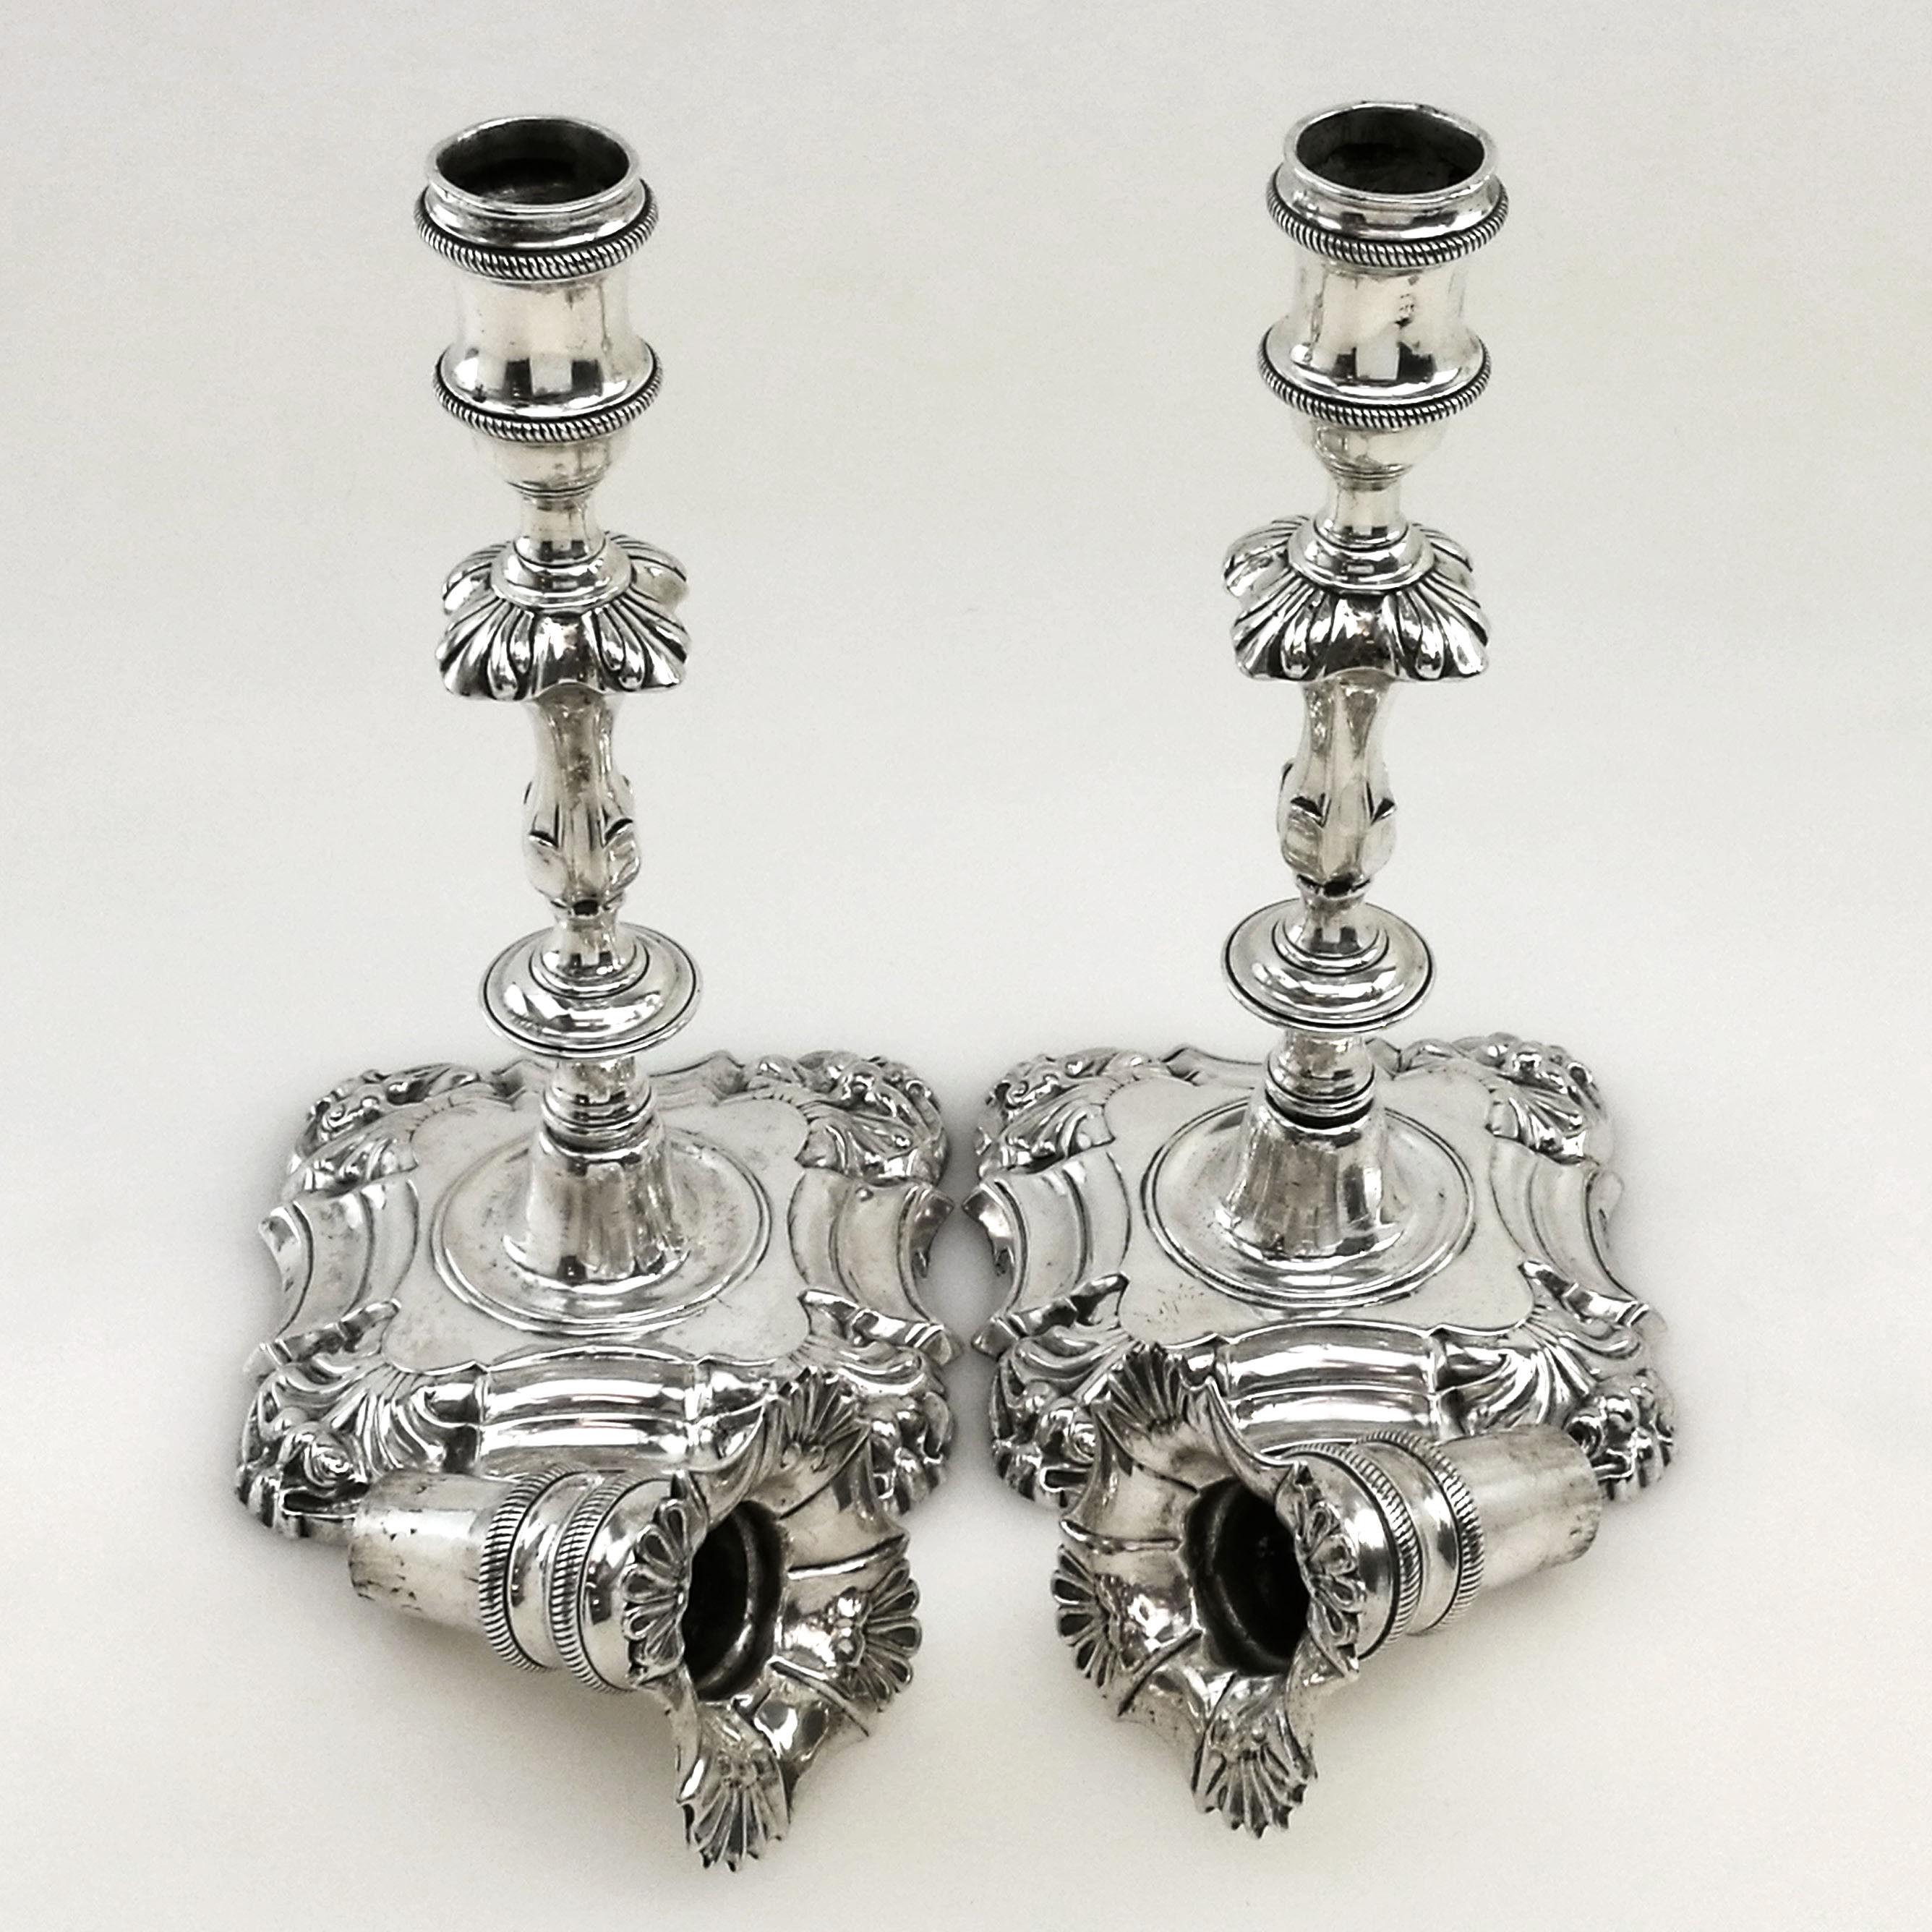 A gorgeous pair of Antique Irish George II Georgian cast solid silver candlesticks. These silver candlesticks stand on shaped square bases with tall elegant knopped columns. The candlesticks each have a tall removable fitted sconce. These